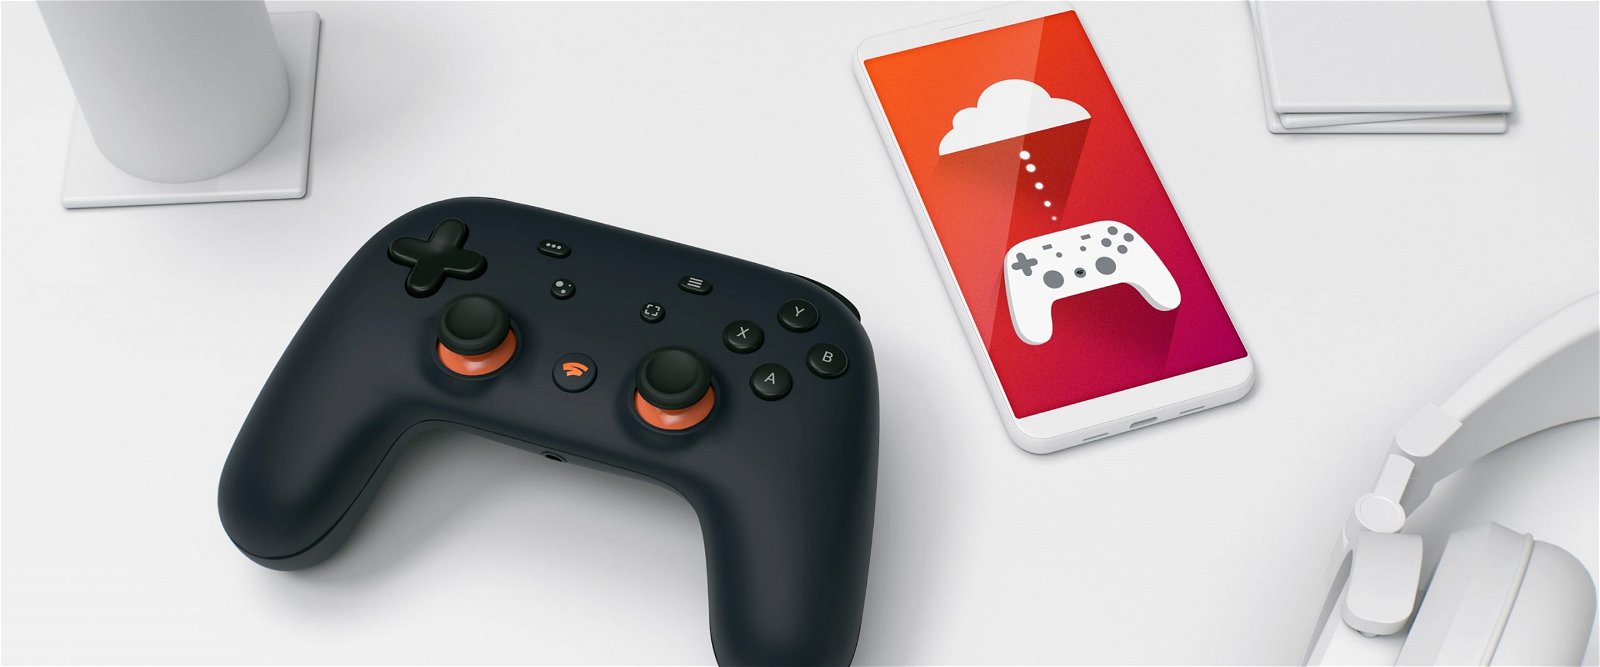 EA Announces Support for Google Stadia With 13 Games Coming